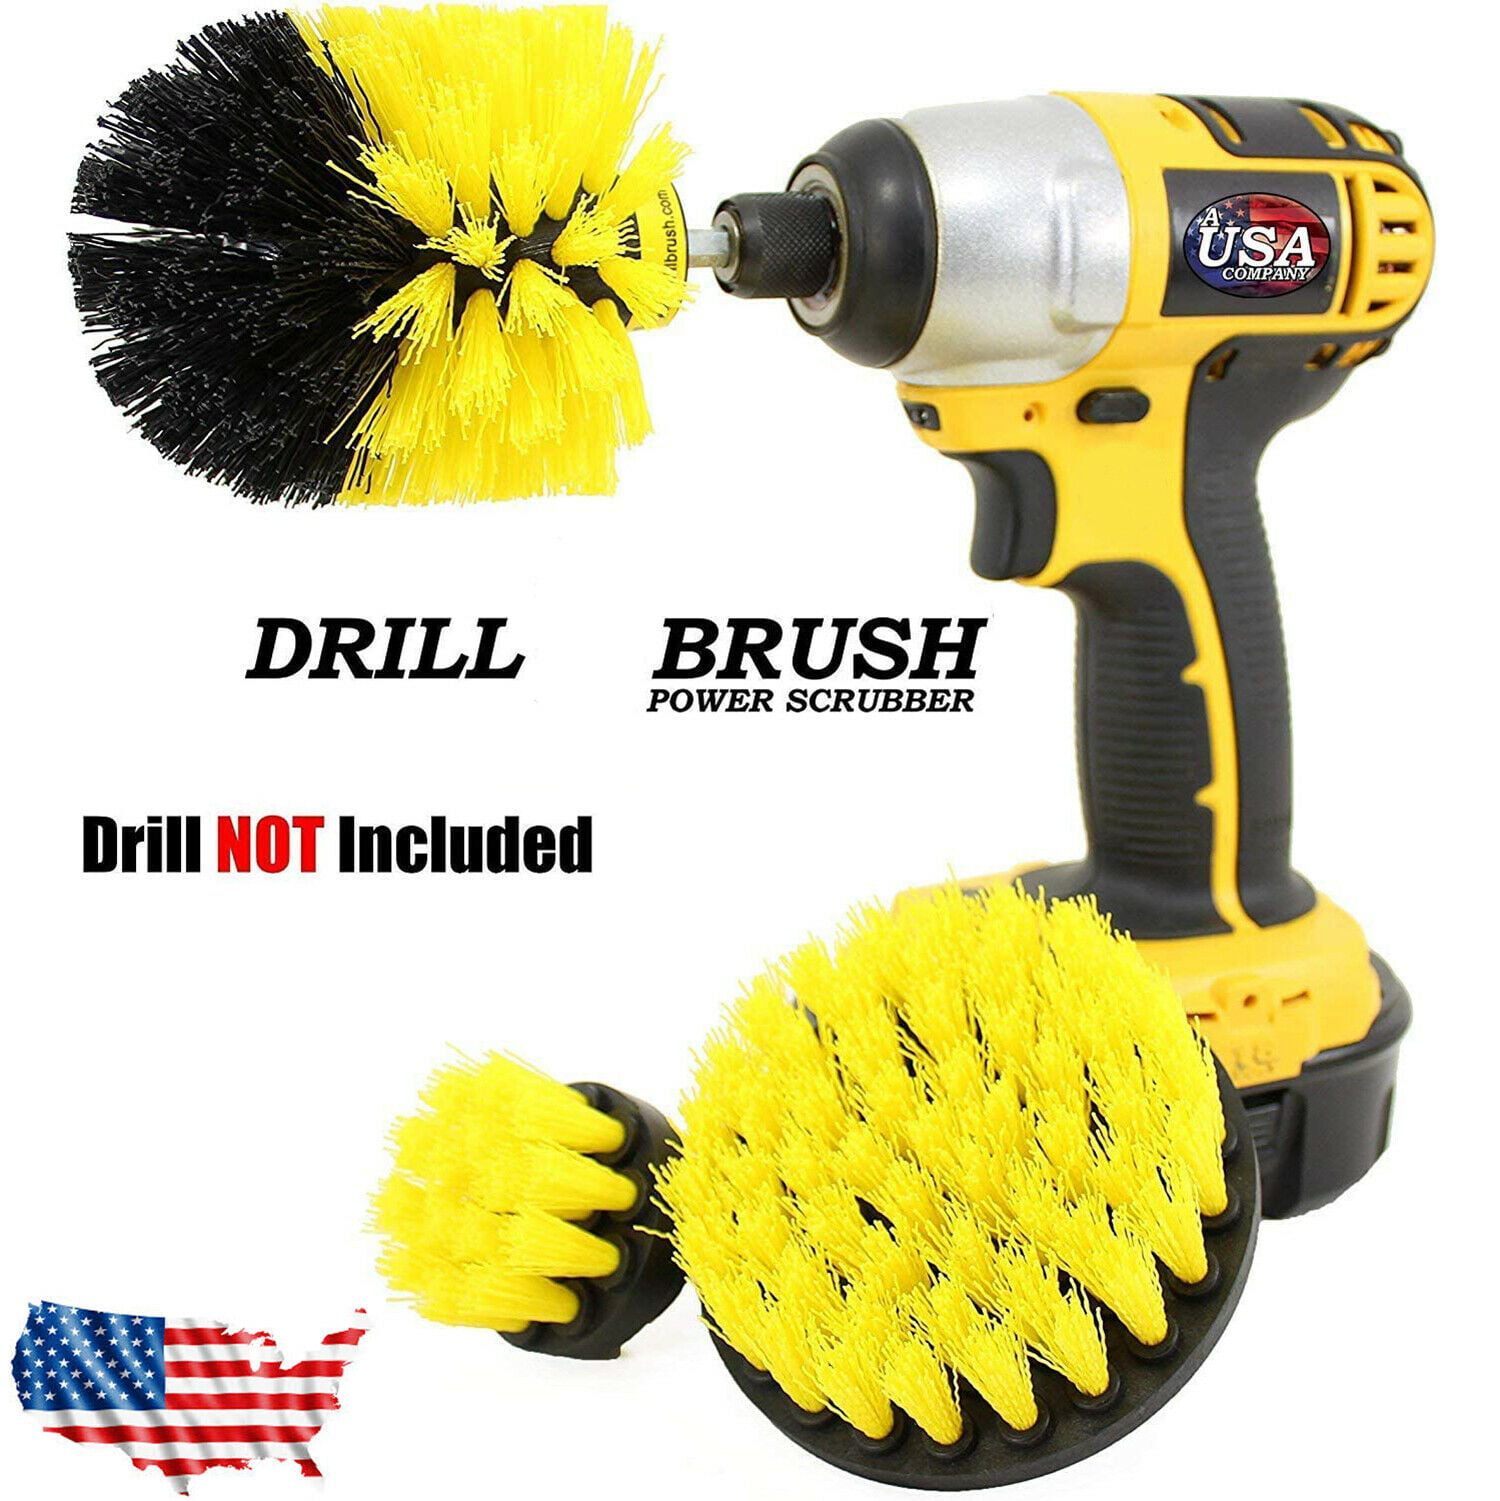 3PCS Drill Brush Power Scrubber Drill Attachments Carpet Tile Grout Cleaning Set 